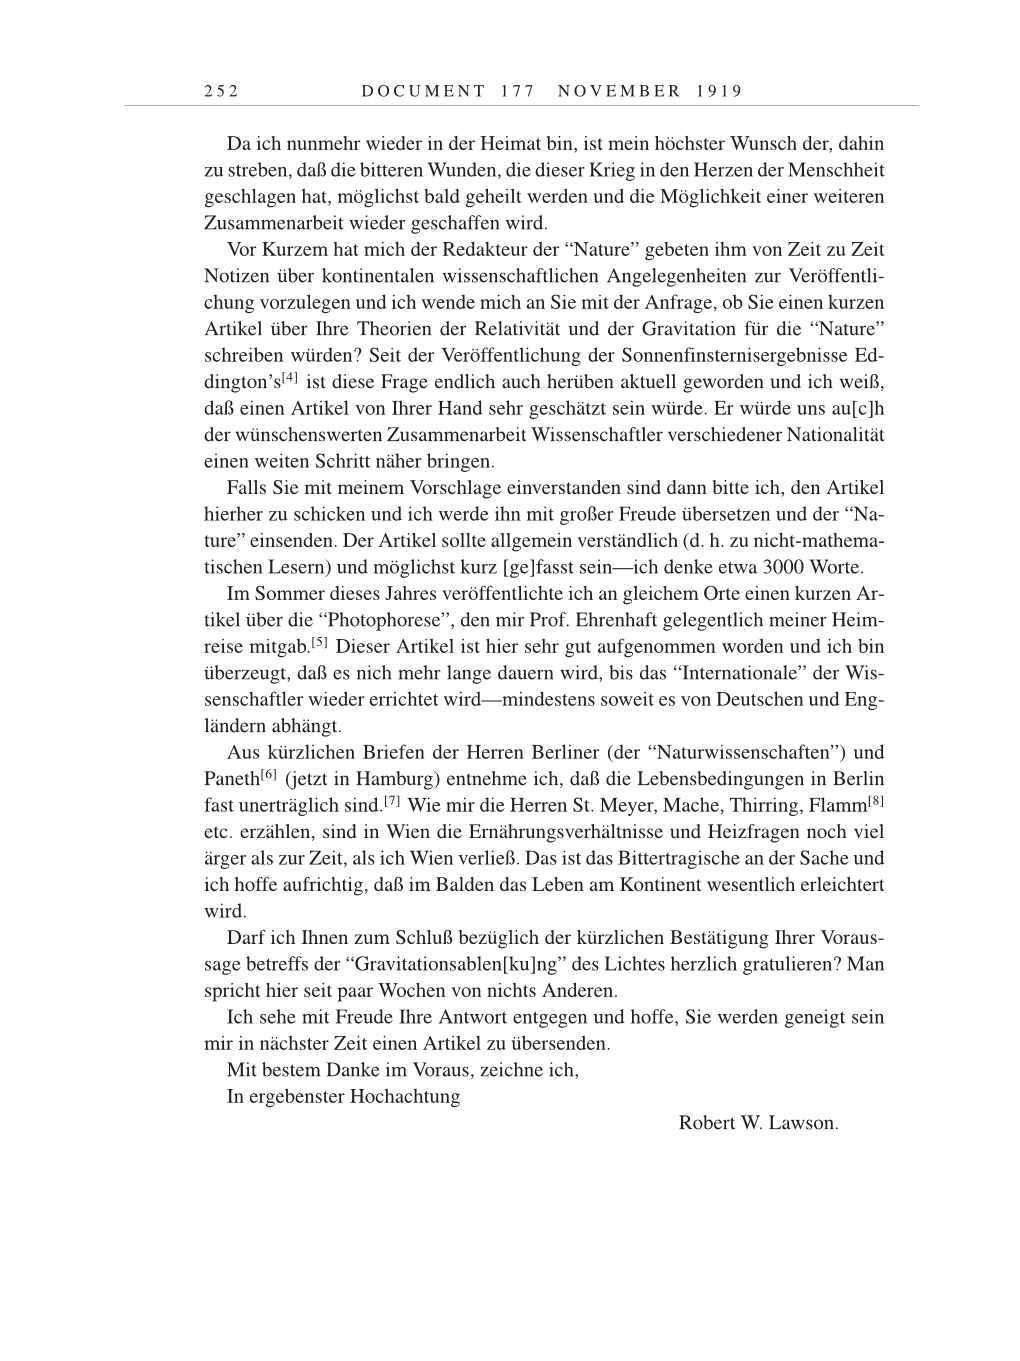 Volume 9: The Berlin Years: Correspondence January 1919-April 1920 page 252